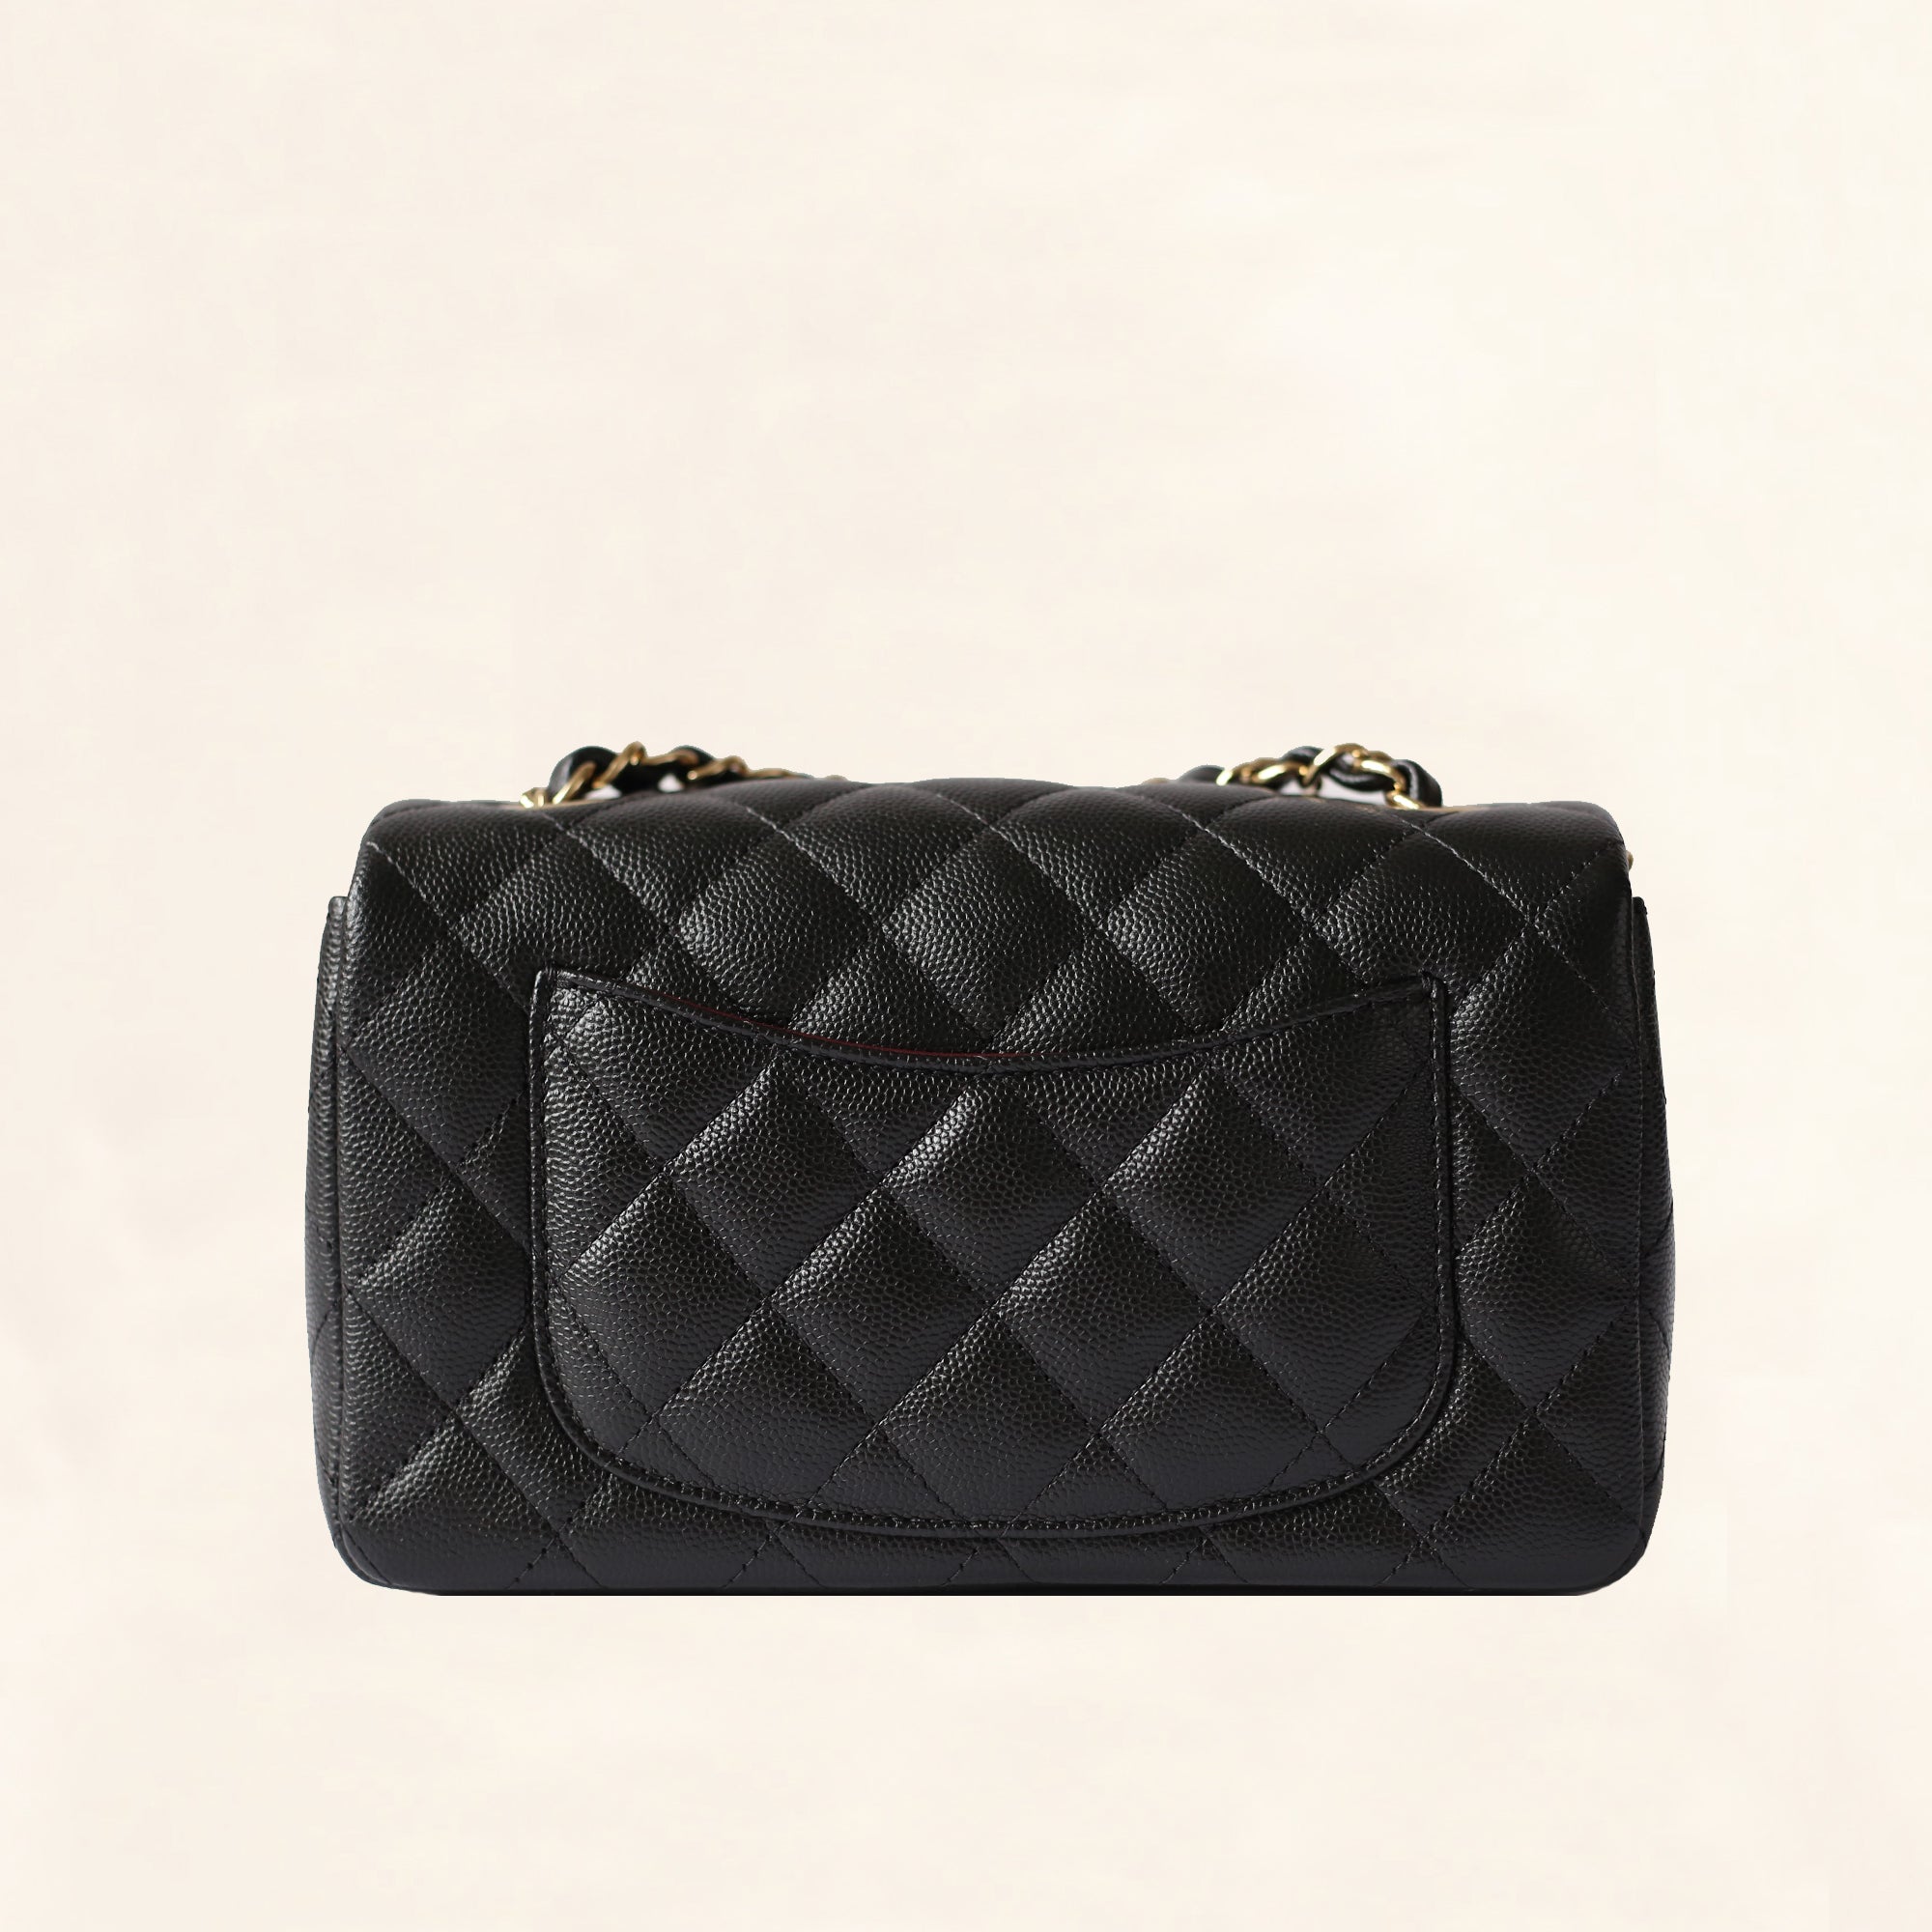 quilted chanel black bag